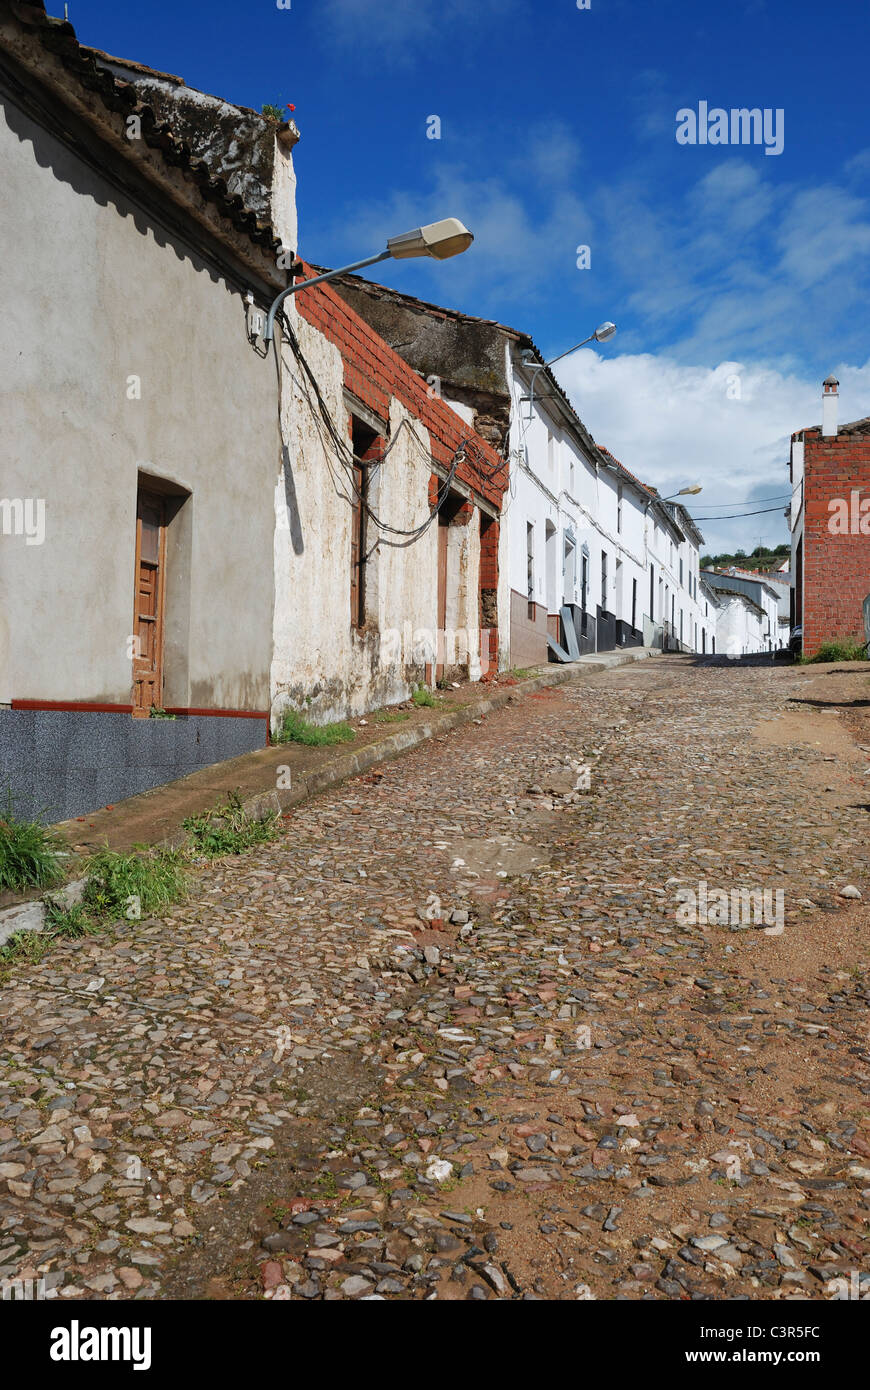 An unpaved street in Fuentes de León, in the province of Badajoz, Extremadura, Spain. Stock Photo